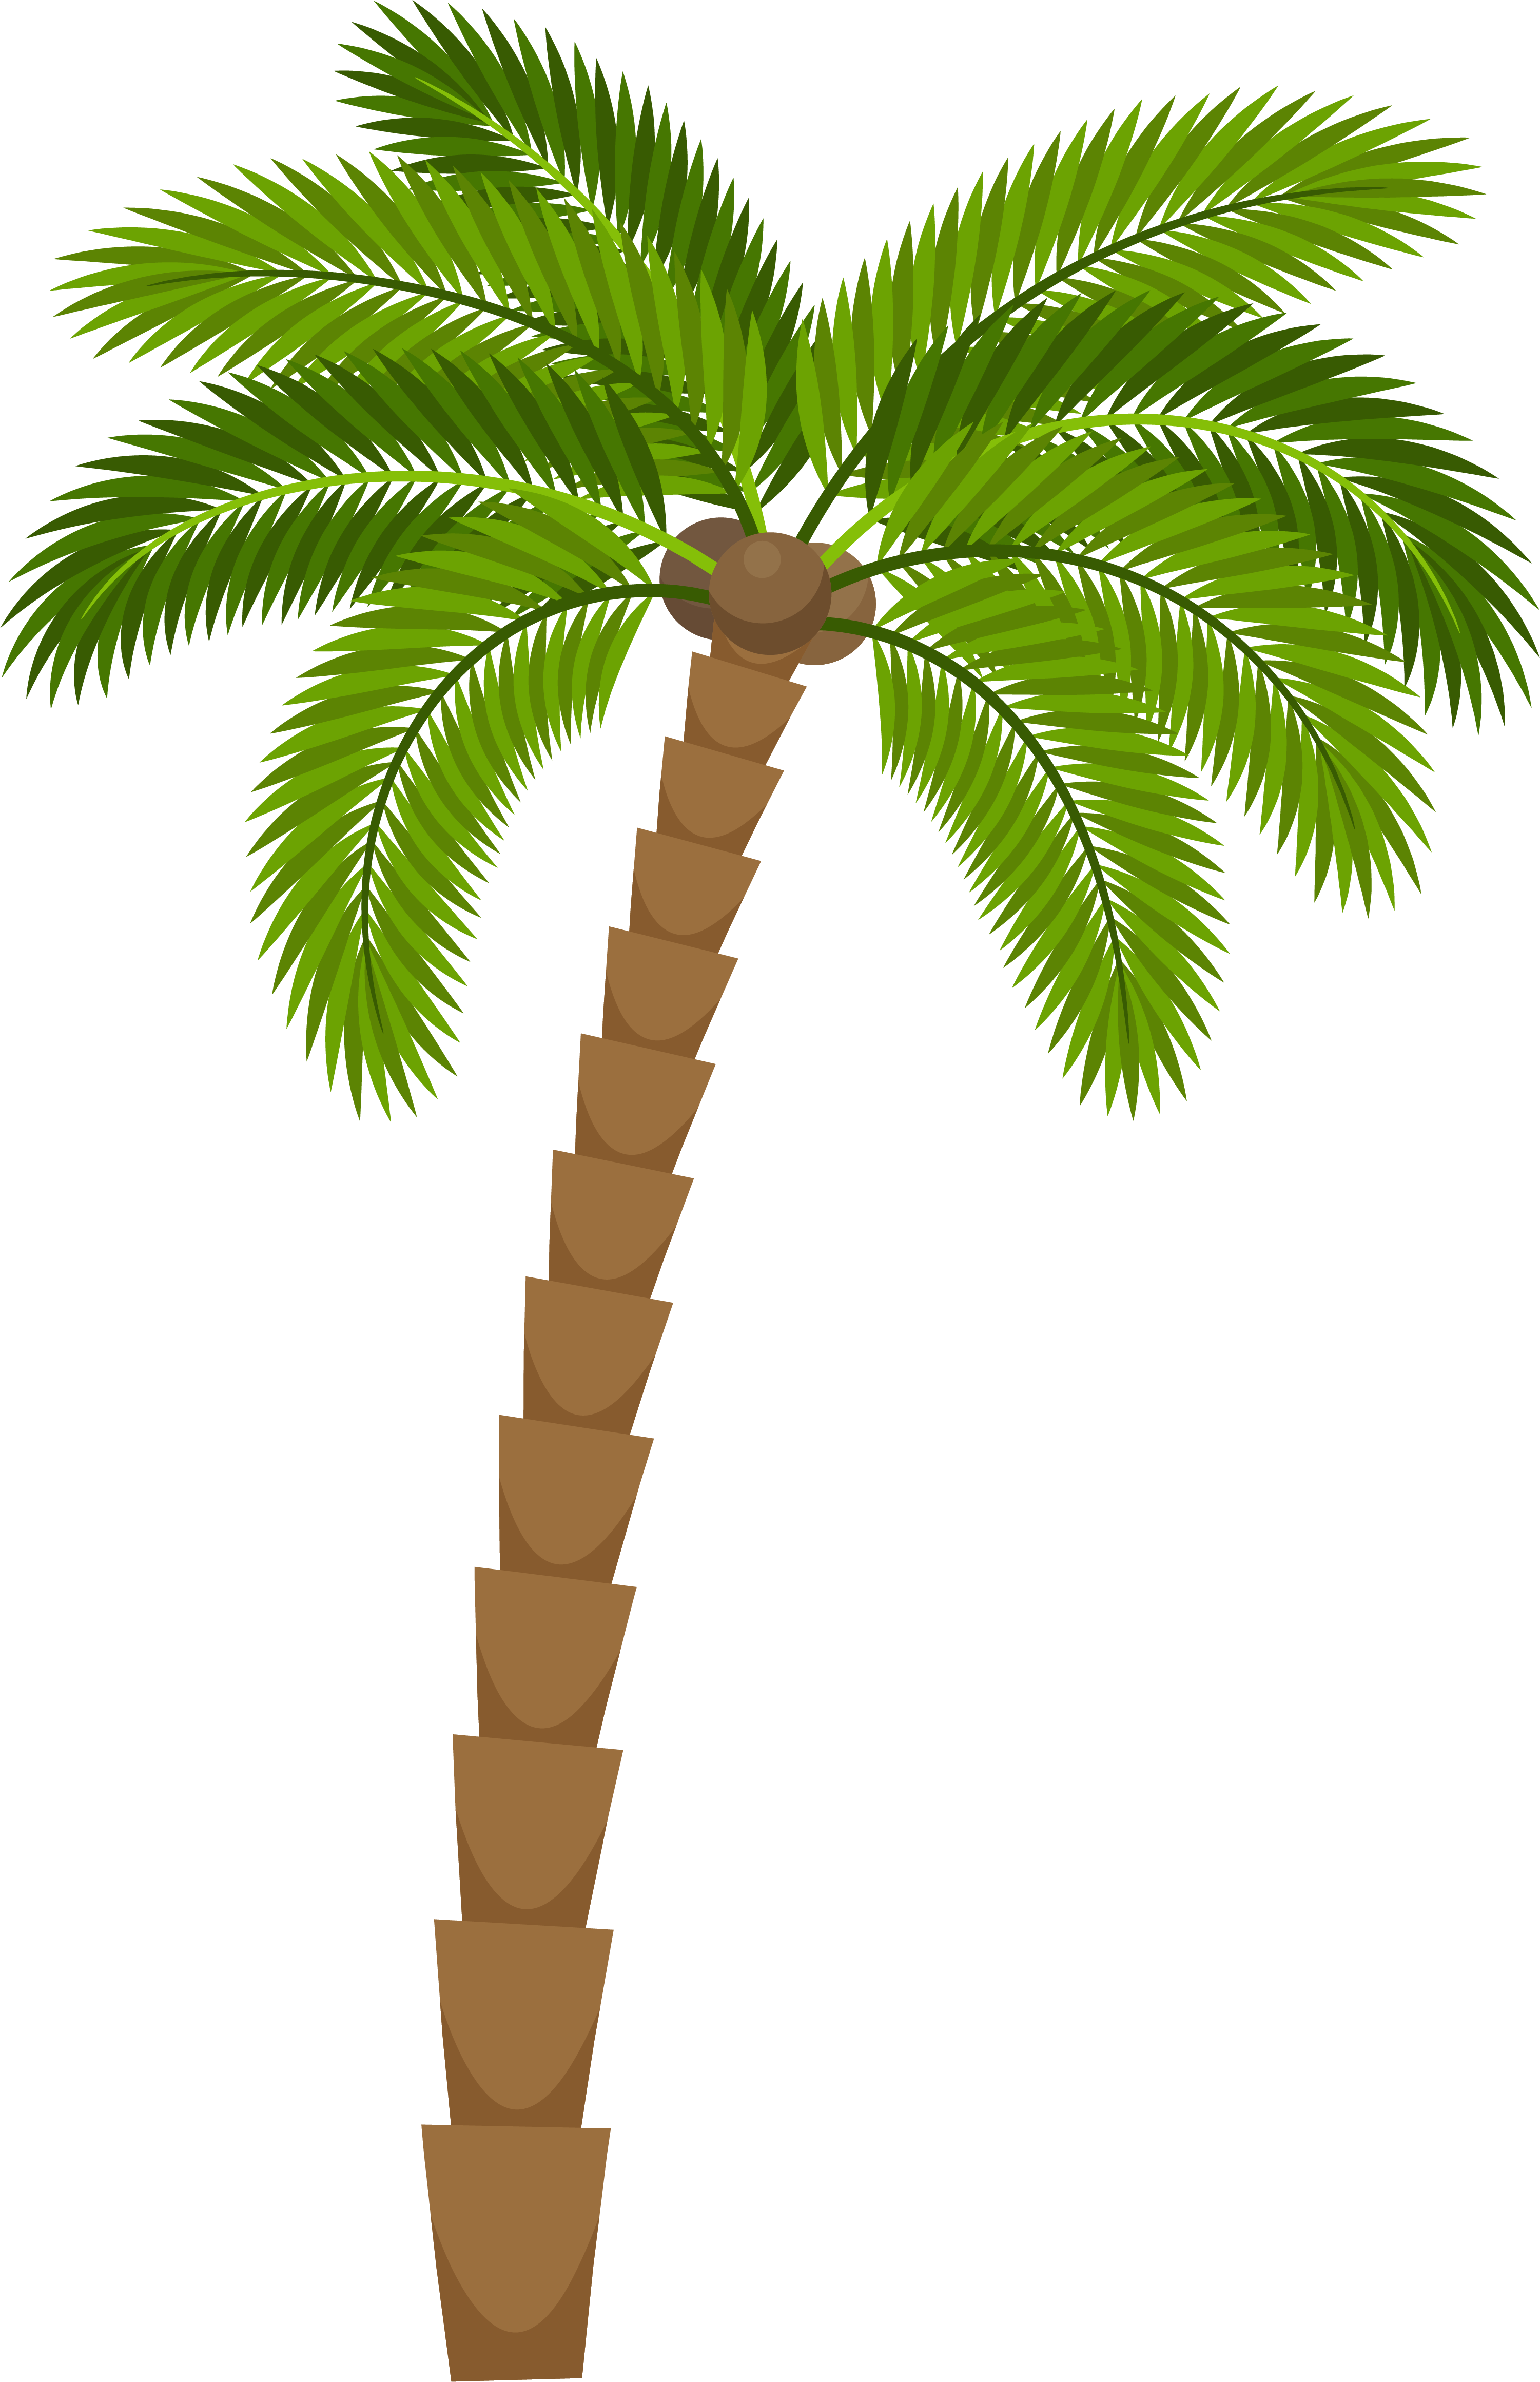 Green Coconut Palm - Free Download Vector PSD and Stock Image